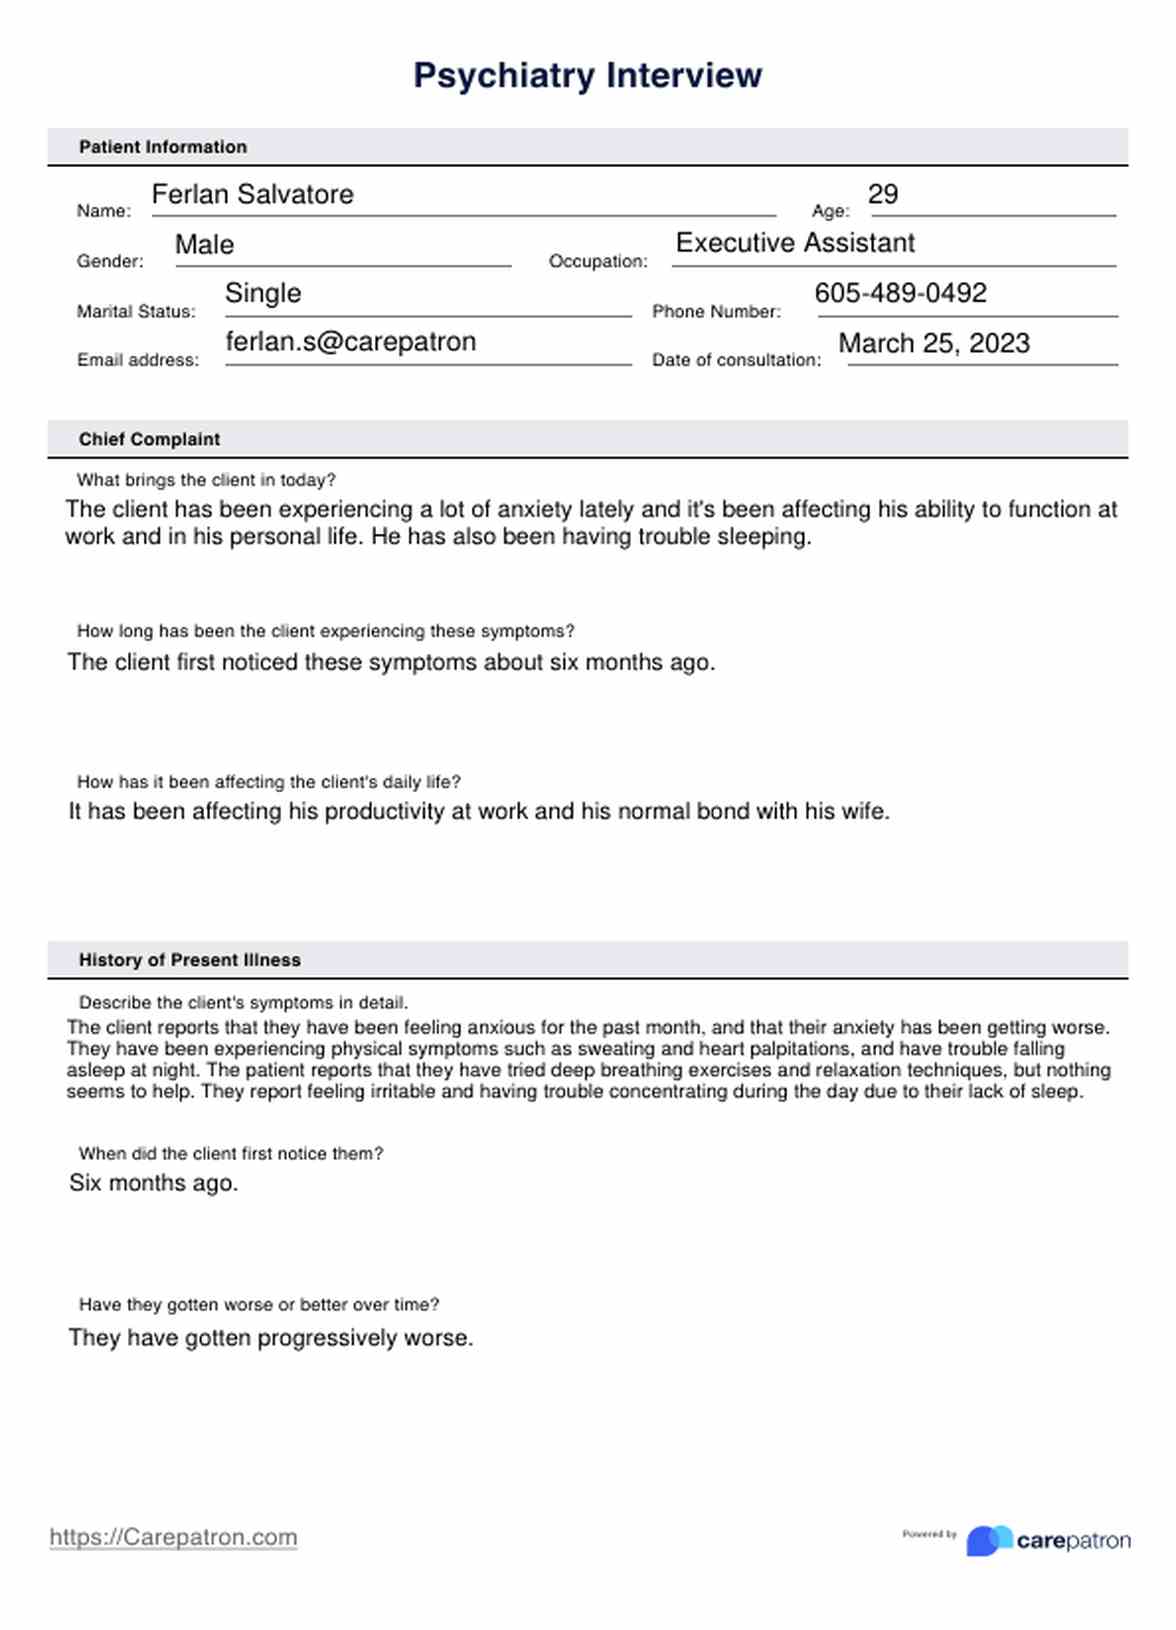 Psychiatry Interview Template PDF Example